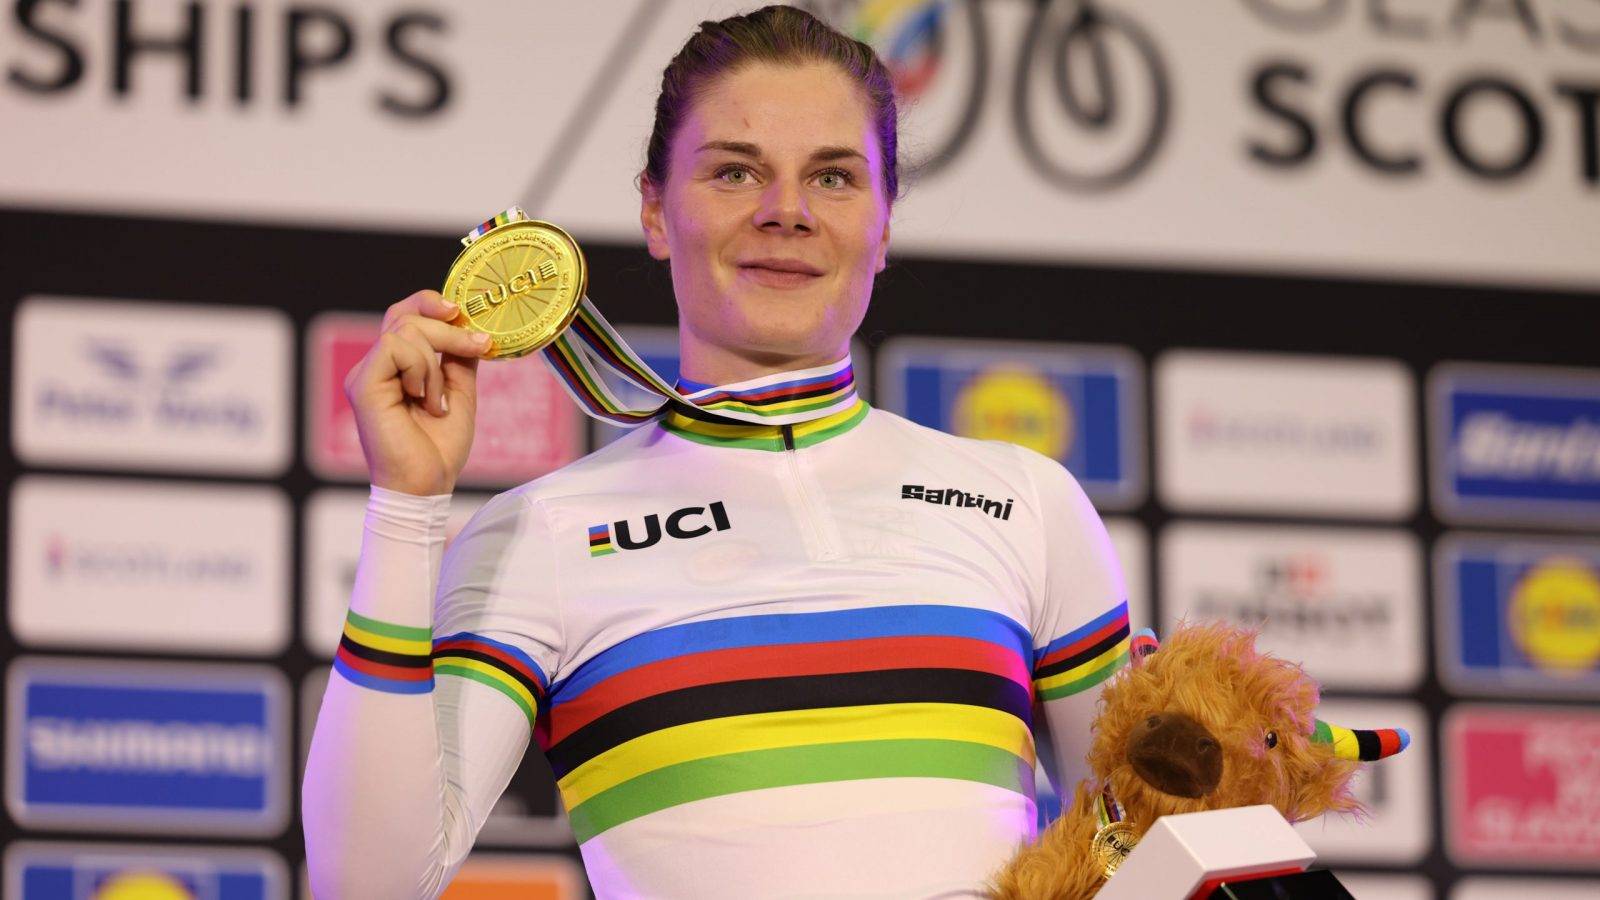 World champion Belgian Lotte Kopecky of SD Worx celebrates with her gold medal on the podium of the Women Elite Points Race at the UCI World Championships Cycling, in Glasgow, Scotland, Tuesday 08 August 2023. UCI organizes the worlds with all cycling disciplines, road cycling, indoor cycling, mountain bike, BMX racing, road para-cycling and indoor para-cycling, in Glasgow from 03 to 13 August.
BELGA PHOTO DAVID PINTENS